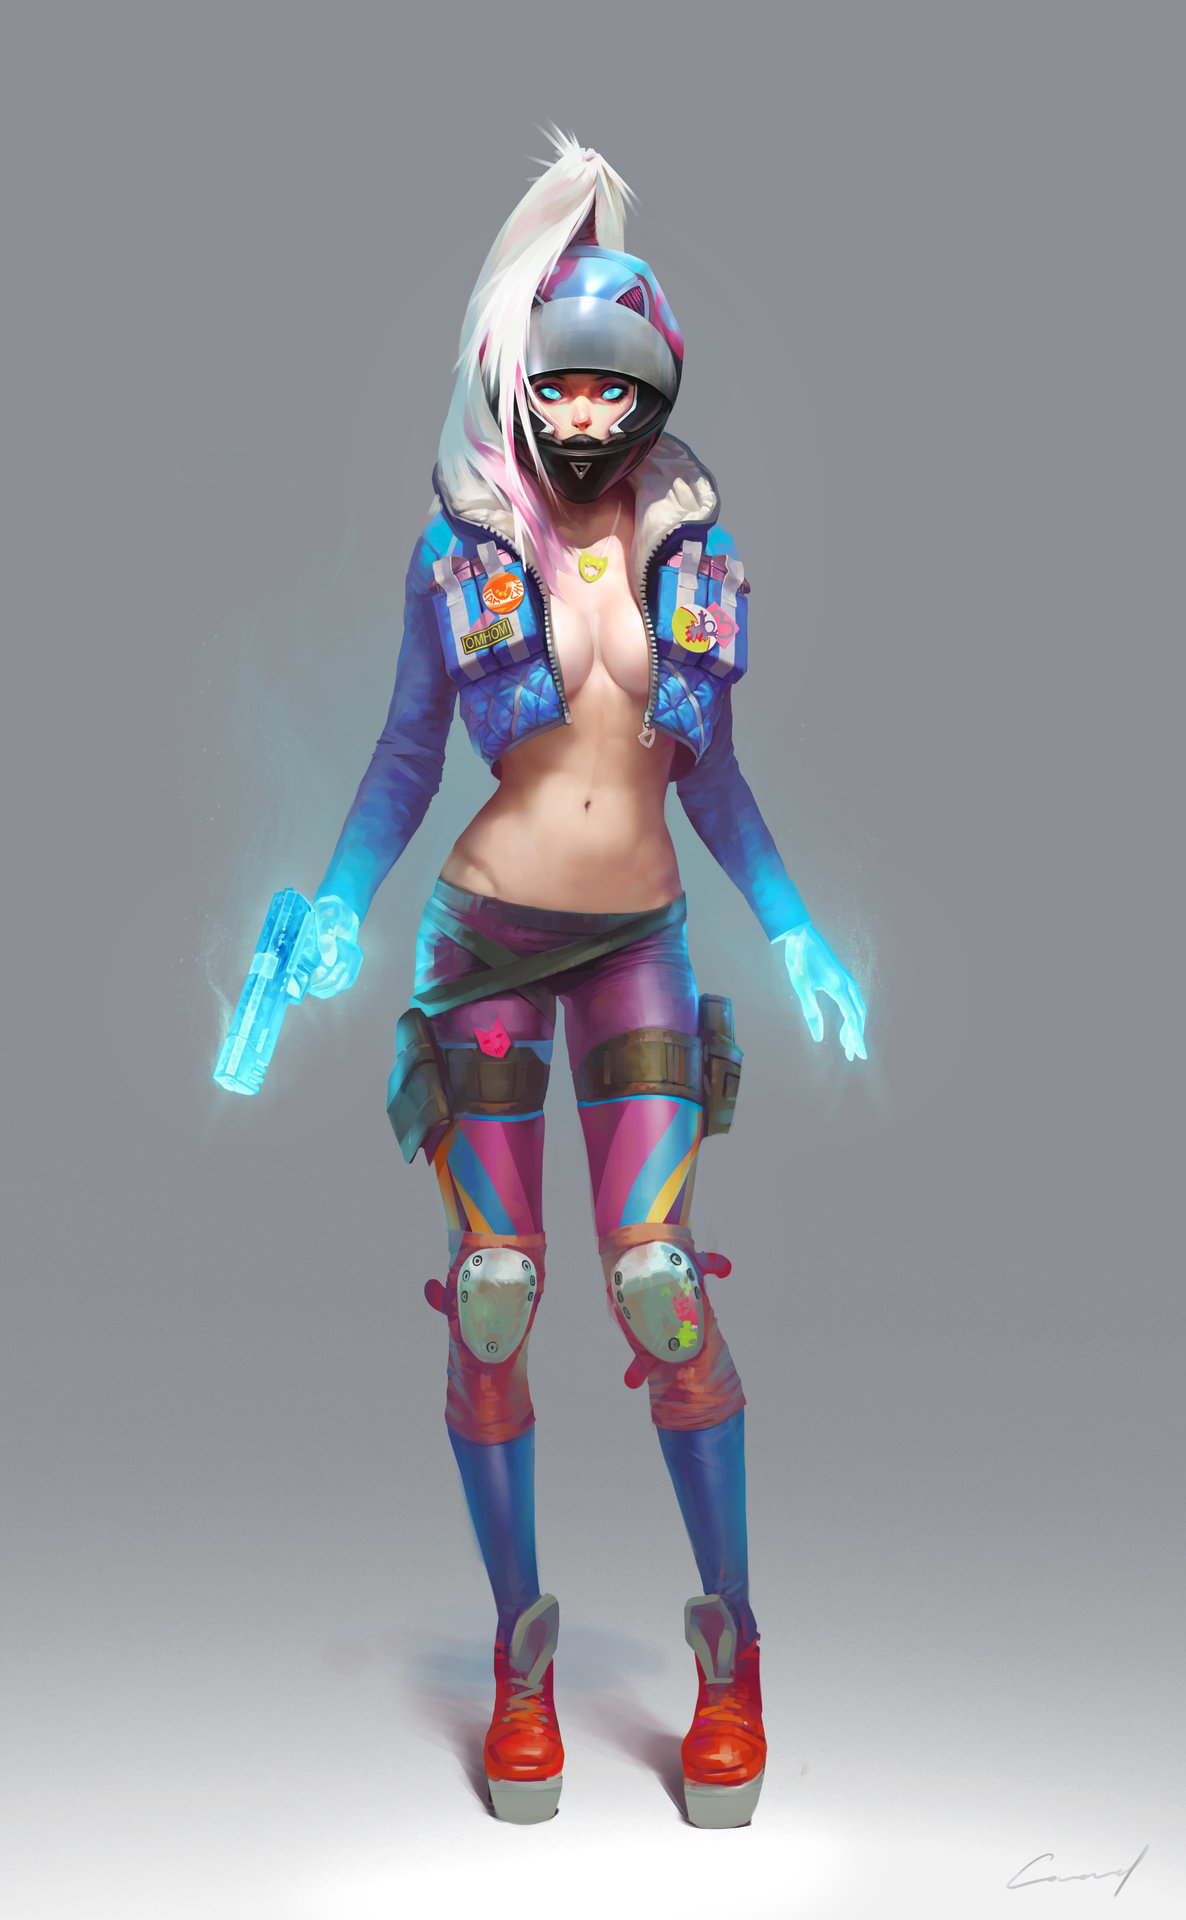 Female character study by Alex Gor pic